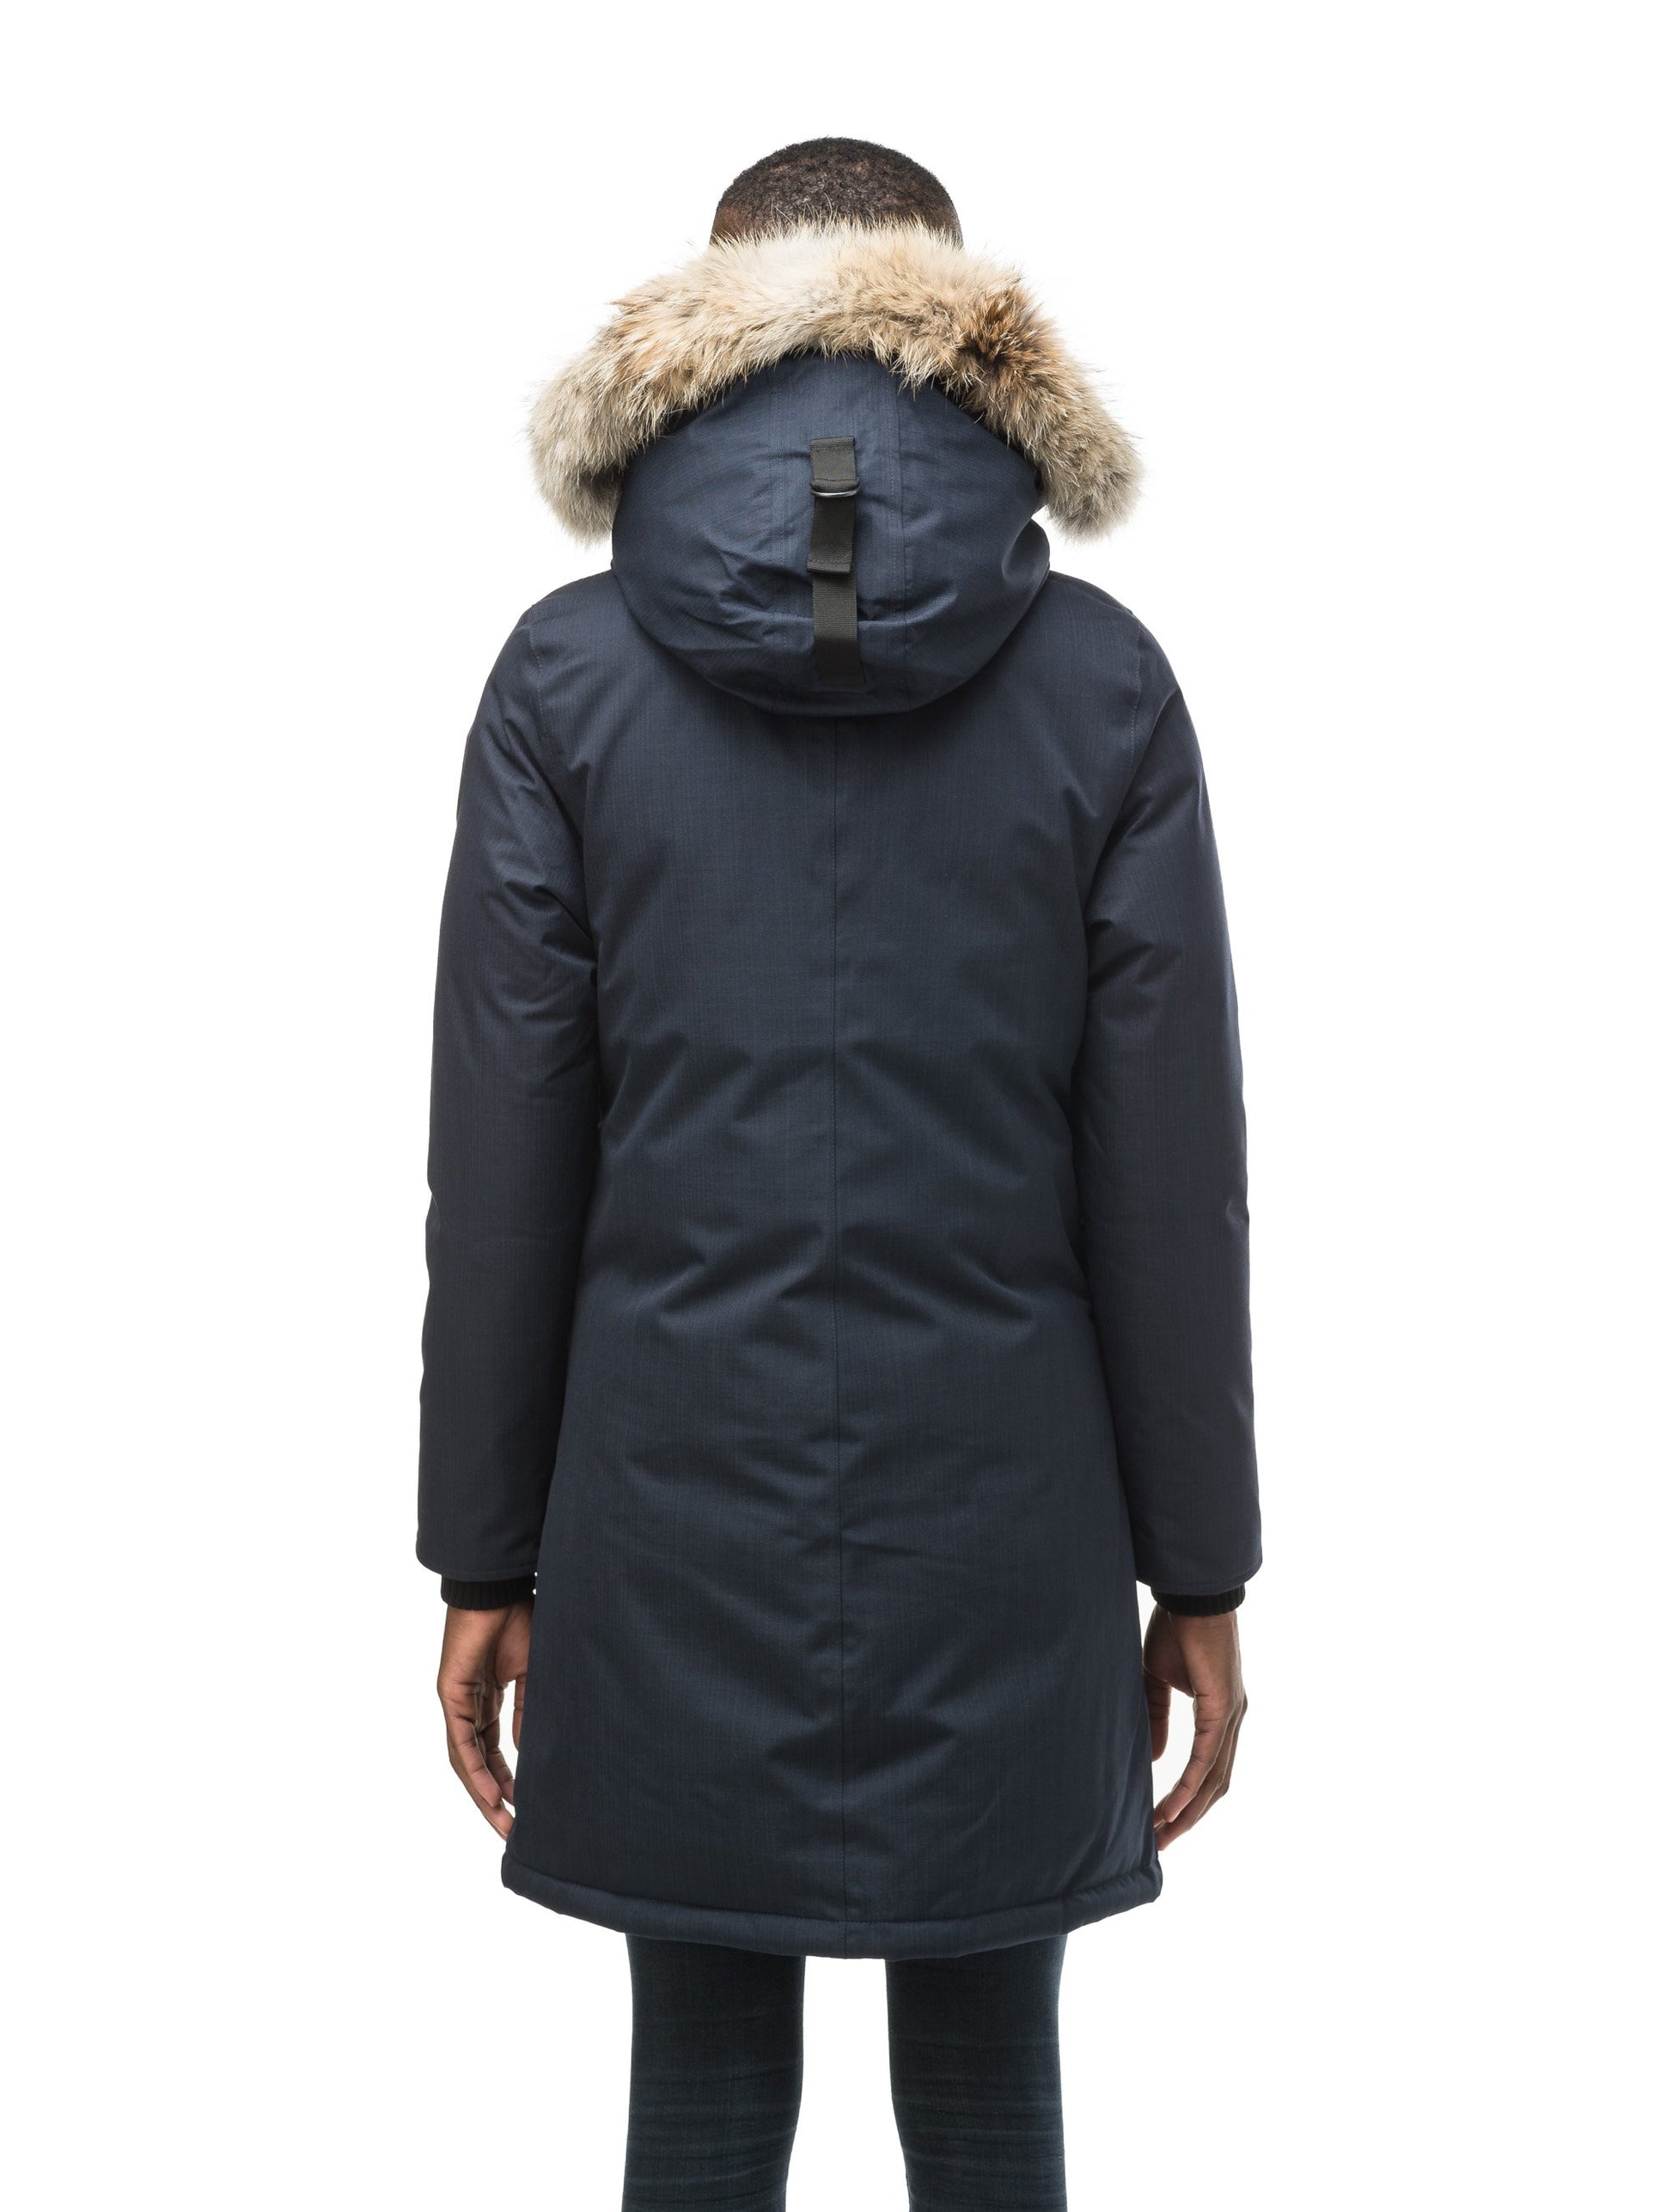 Best selling women's down filled knee length parka with removable down filled hood in CH Navy